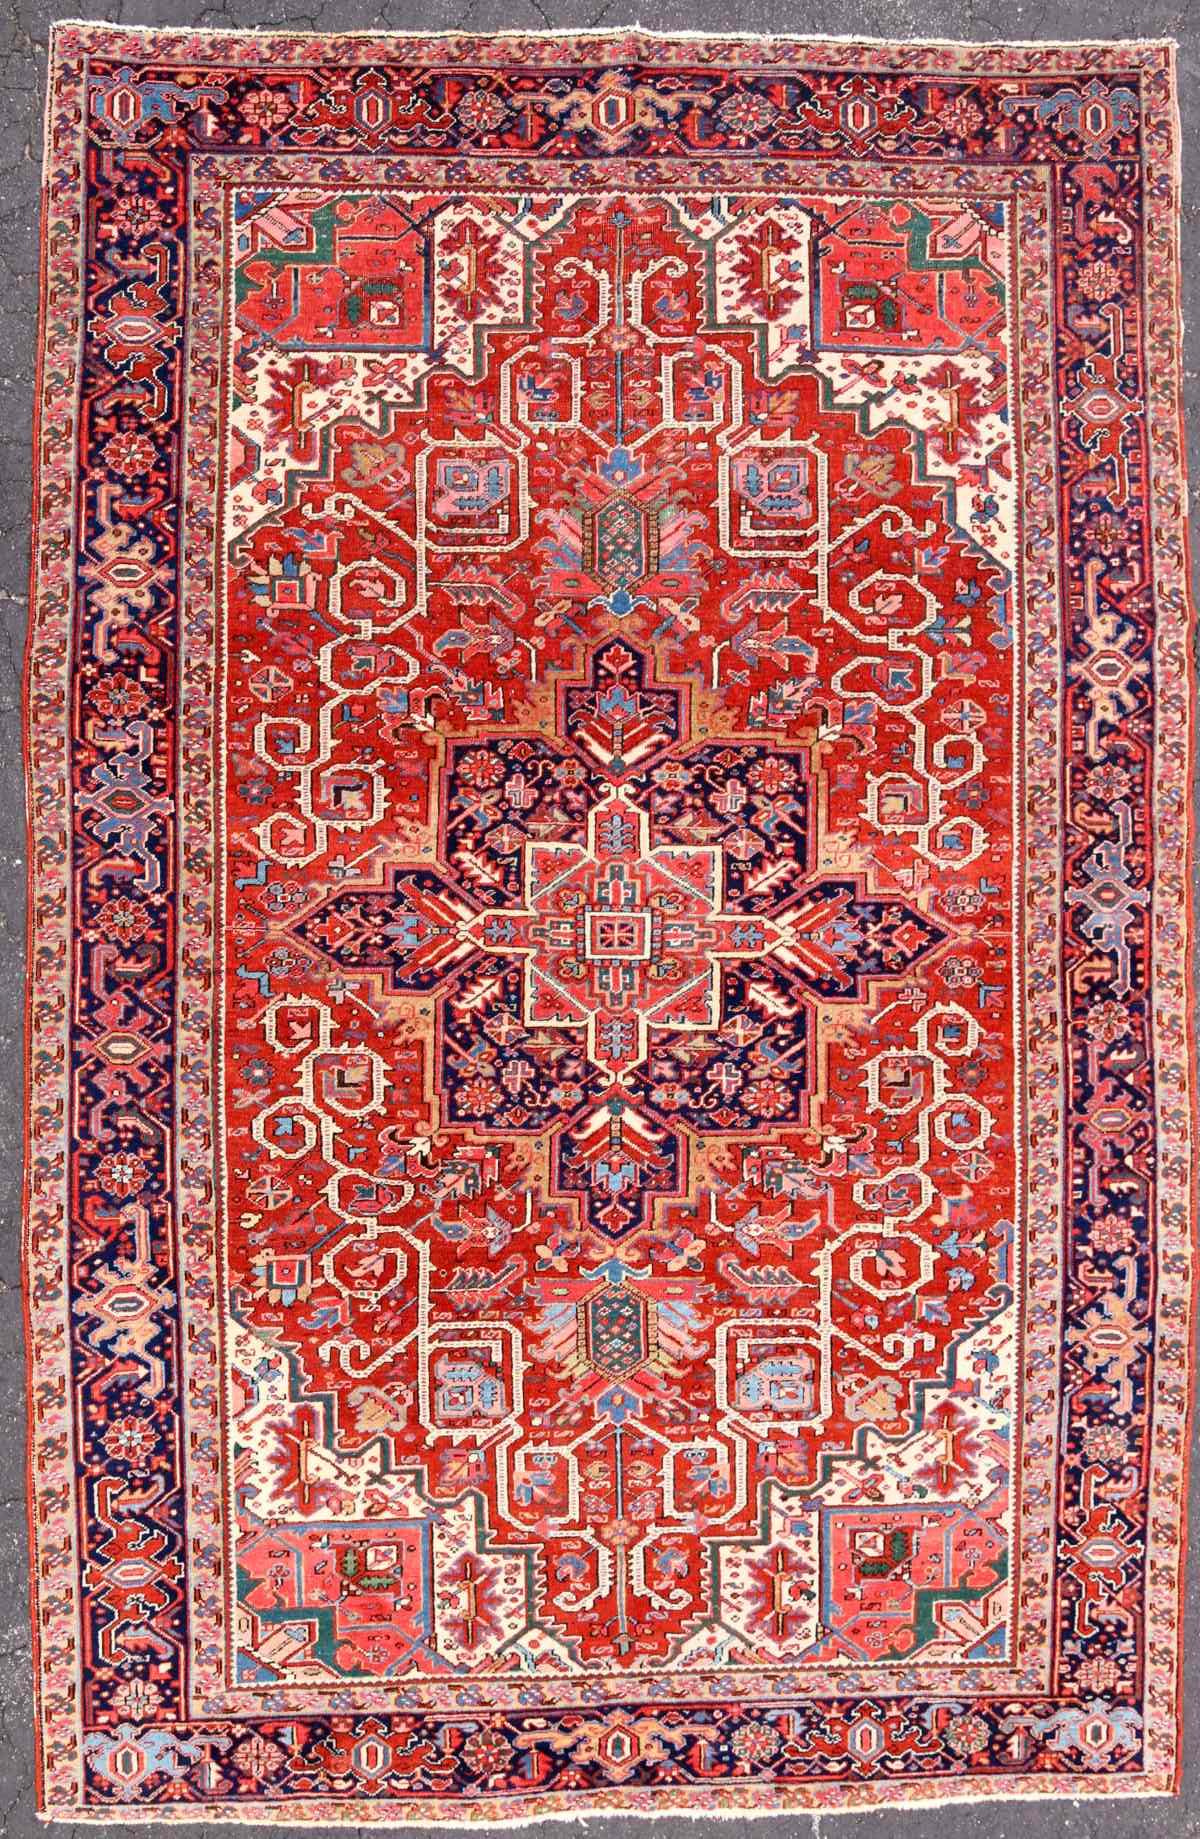 A GOOD EARLY 20TH CENTURY NW PERSIAN HERIZ CARPET